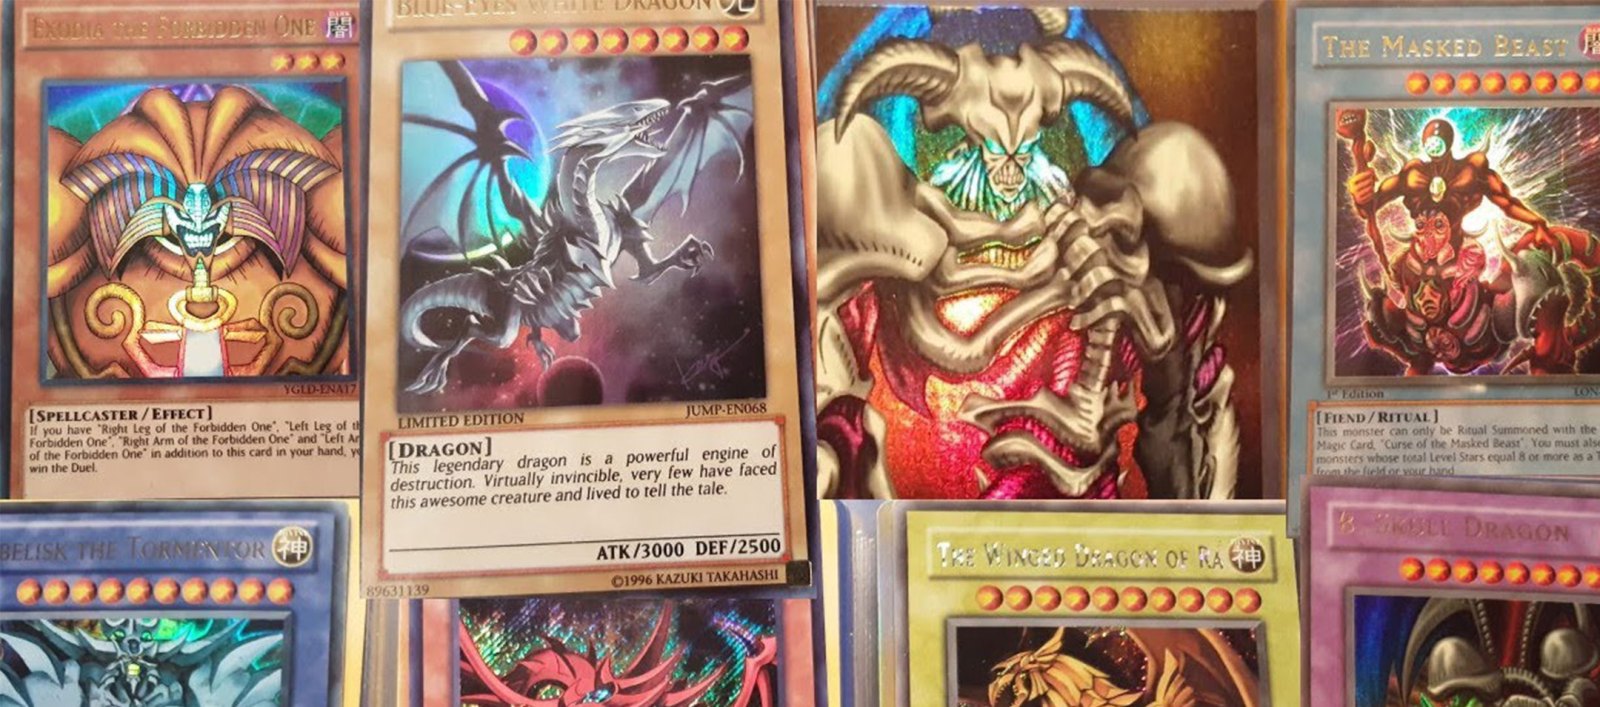 In third grade, I once had my entire deck of only-holographic Yugioh cards confiscated from me for playing with them during break time too much with friends. I was told I'd be able to get them back when I graduated school (6th grade).<br><br>I said okay, not totally understanding what was going on. I forgot about them completely (though I still kept a vested interest in the TCG for a few more years, like into 5th grade) until 9th grade. I went back and asked my old 3rd grade teacher to return my property. Within seconds, she pulls them out of her desk drawer and hands me them. It was an odd experience. -u/SepSev7n